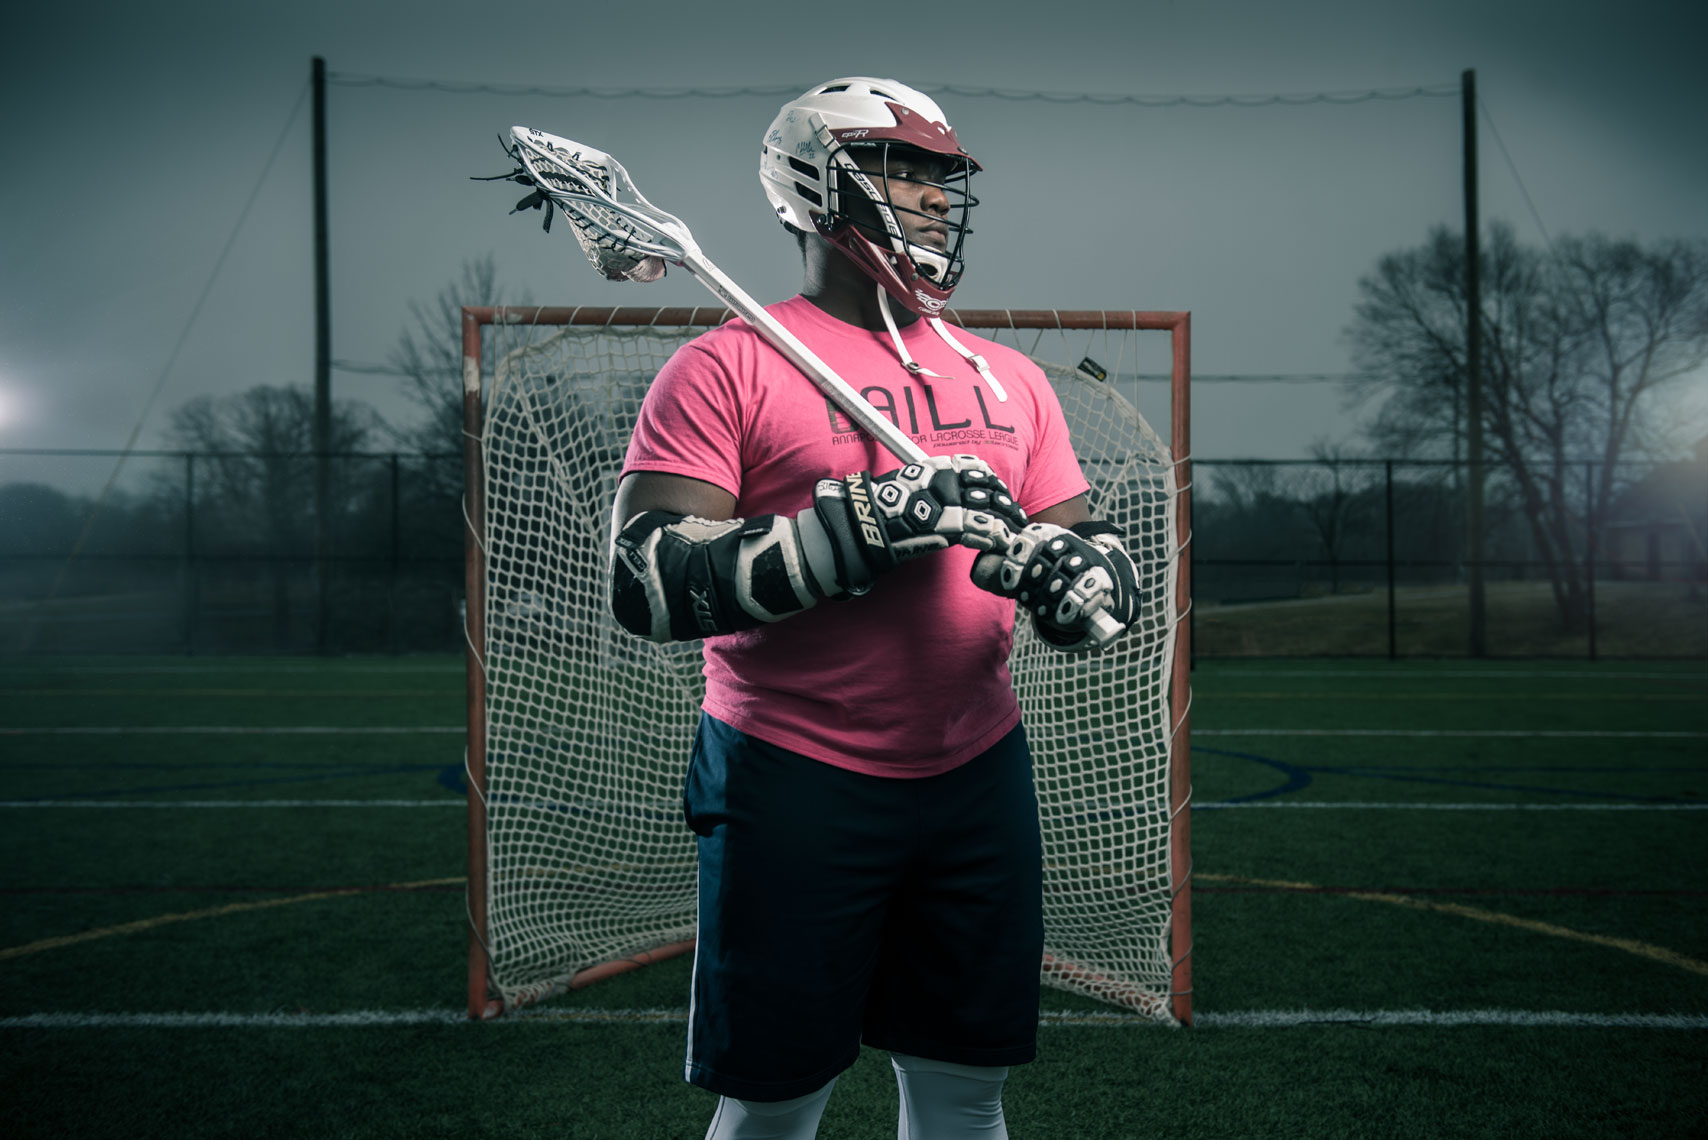 Lacrosse player JoJo Bright holding a lacrosse stick in a pink shirt in front of a goal